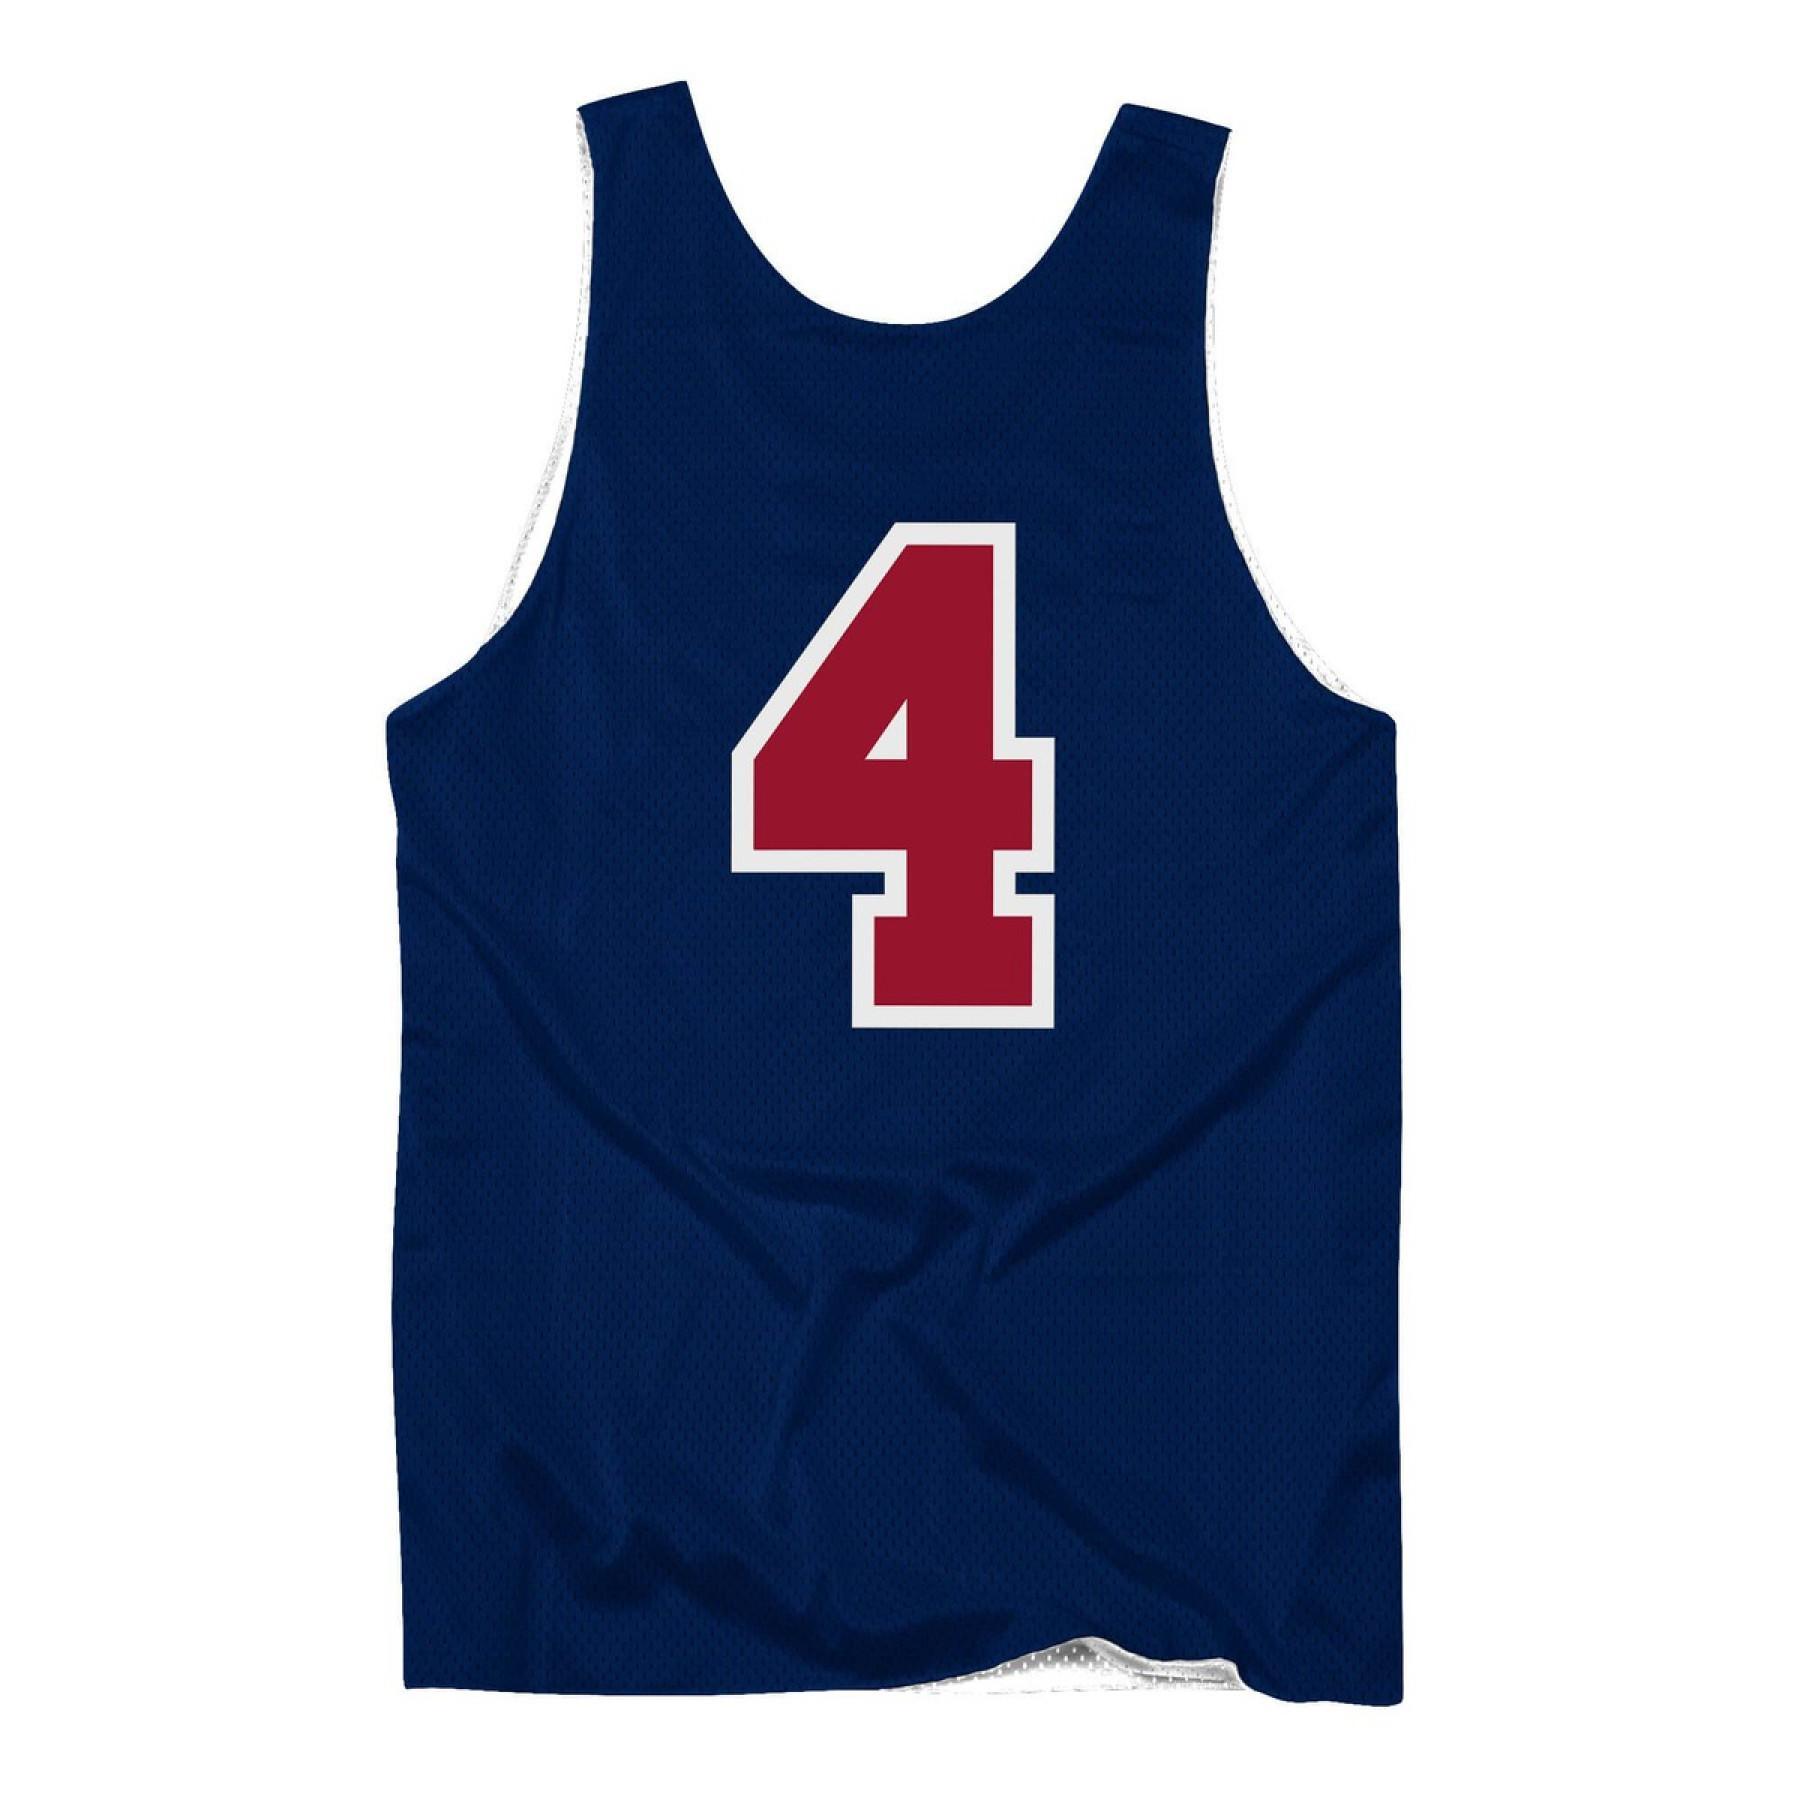 Authentic team jersey USA reversible practice Christian Laettner